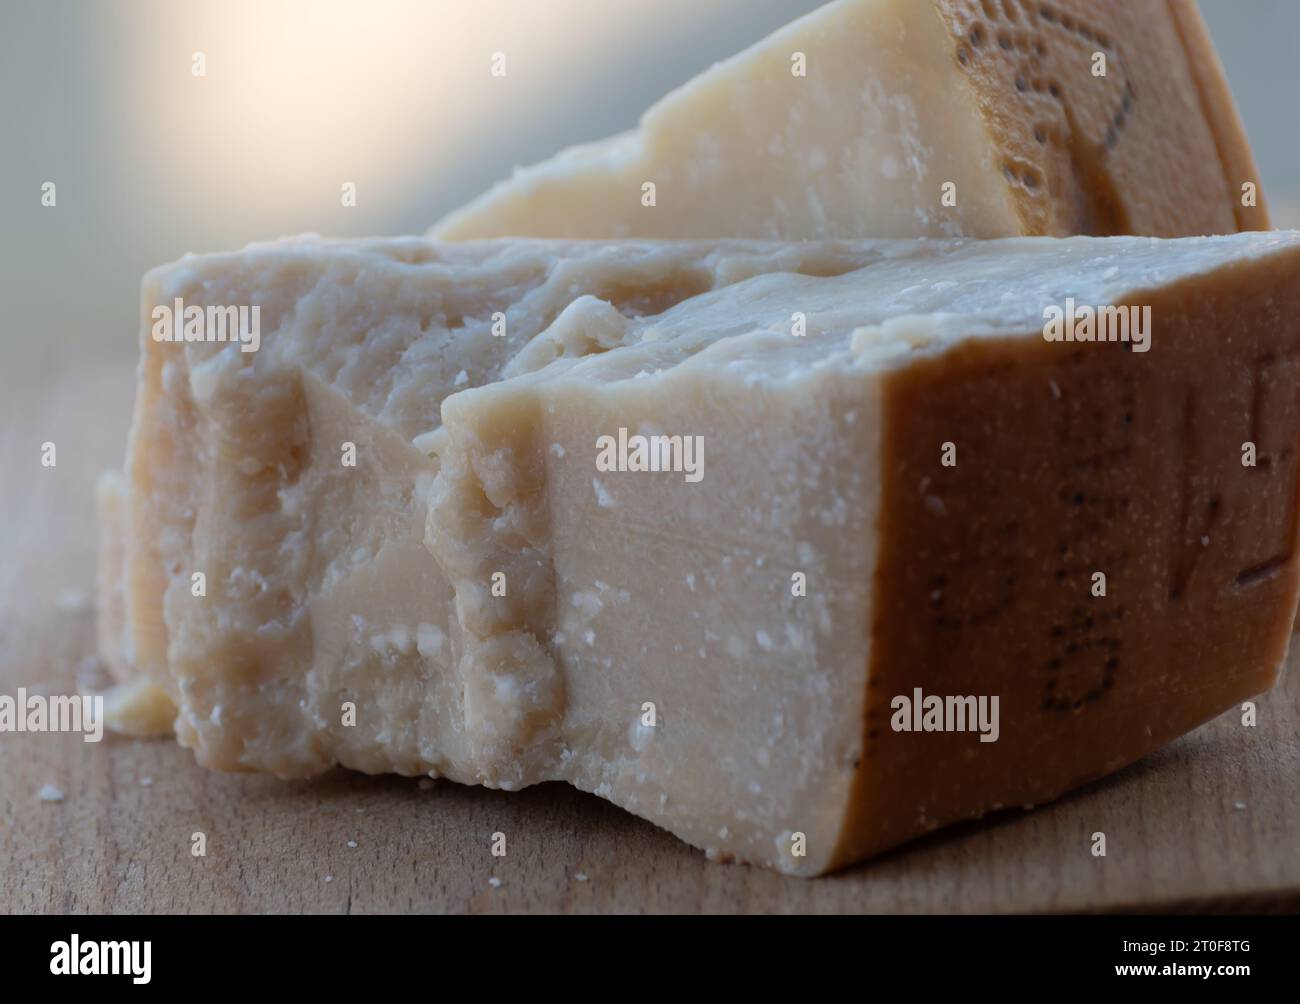 https://c8.alamy.com/comp/2T0F8TG/traditional-italian-food-36-months-aged-in-caves-italian-parmesan-hard-cow-milk-cheese-from-parma-parmigiano-reggiano-italy-2T0F8TG.jpg